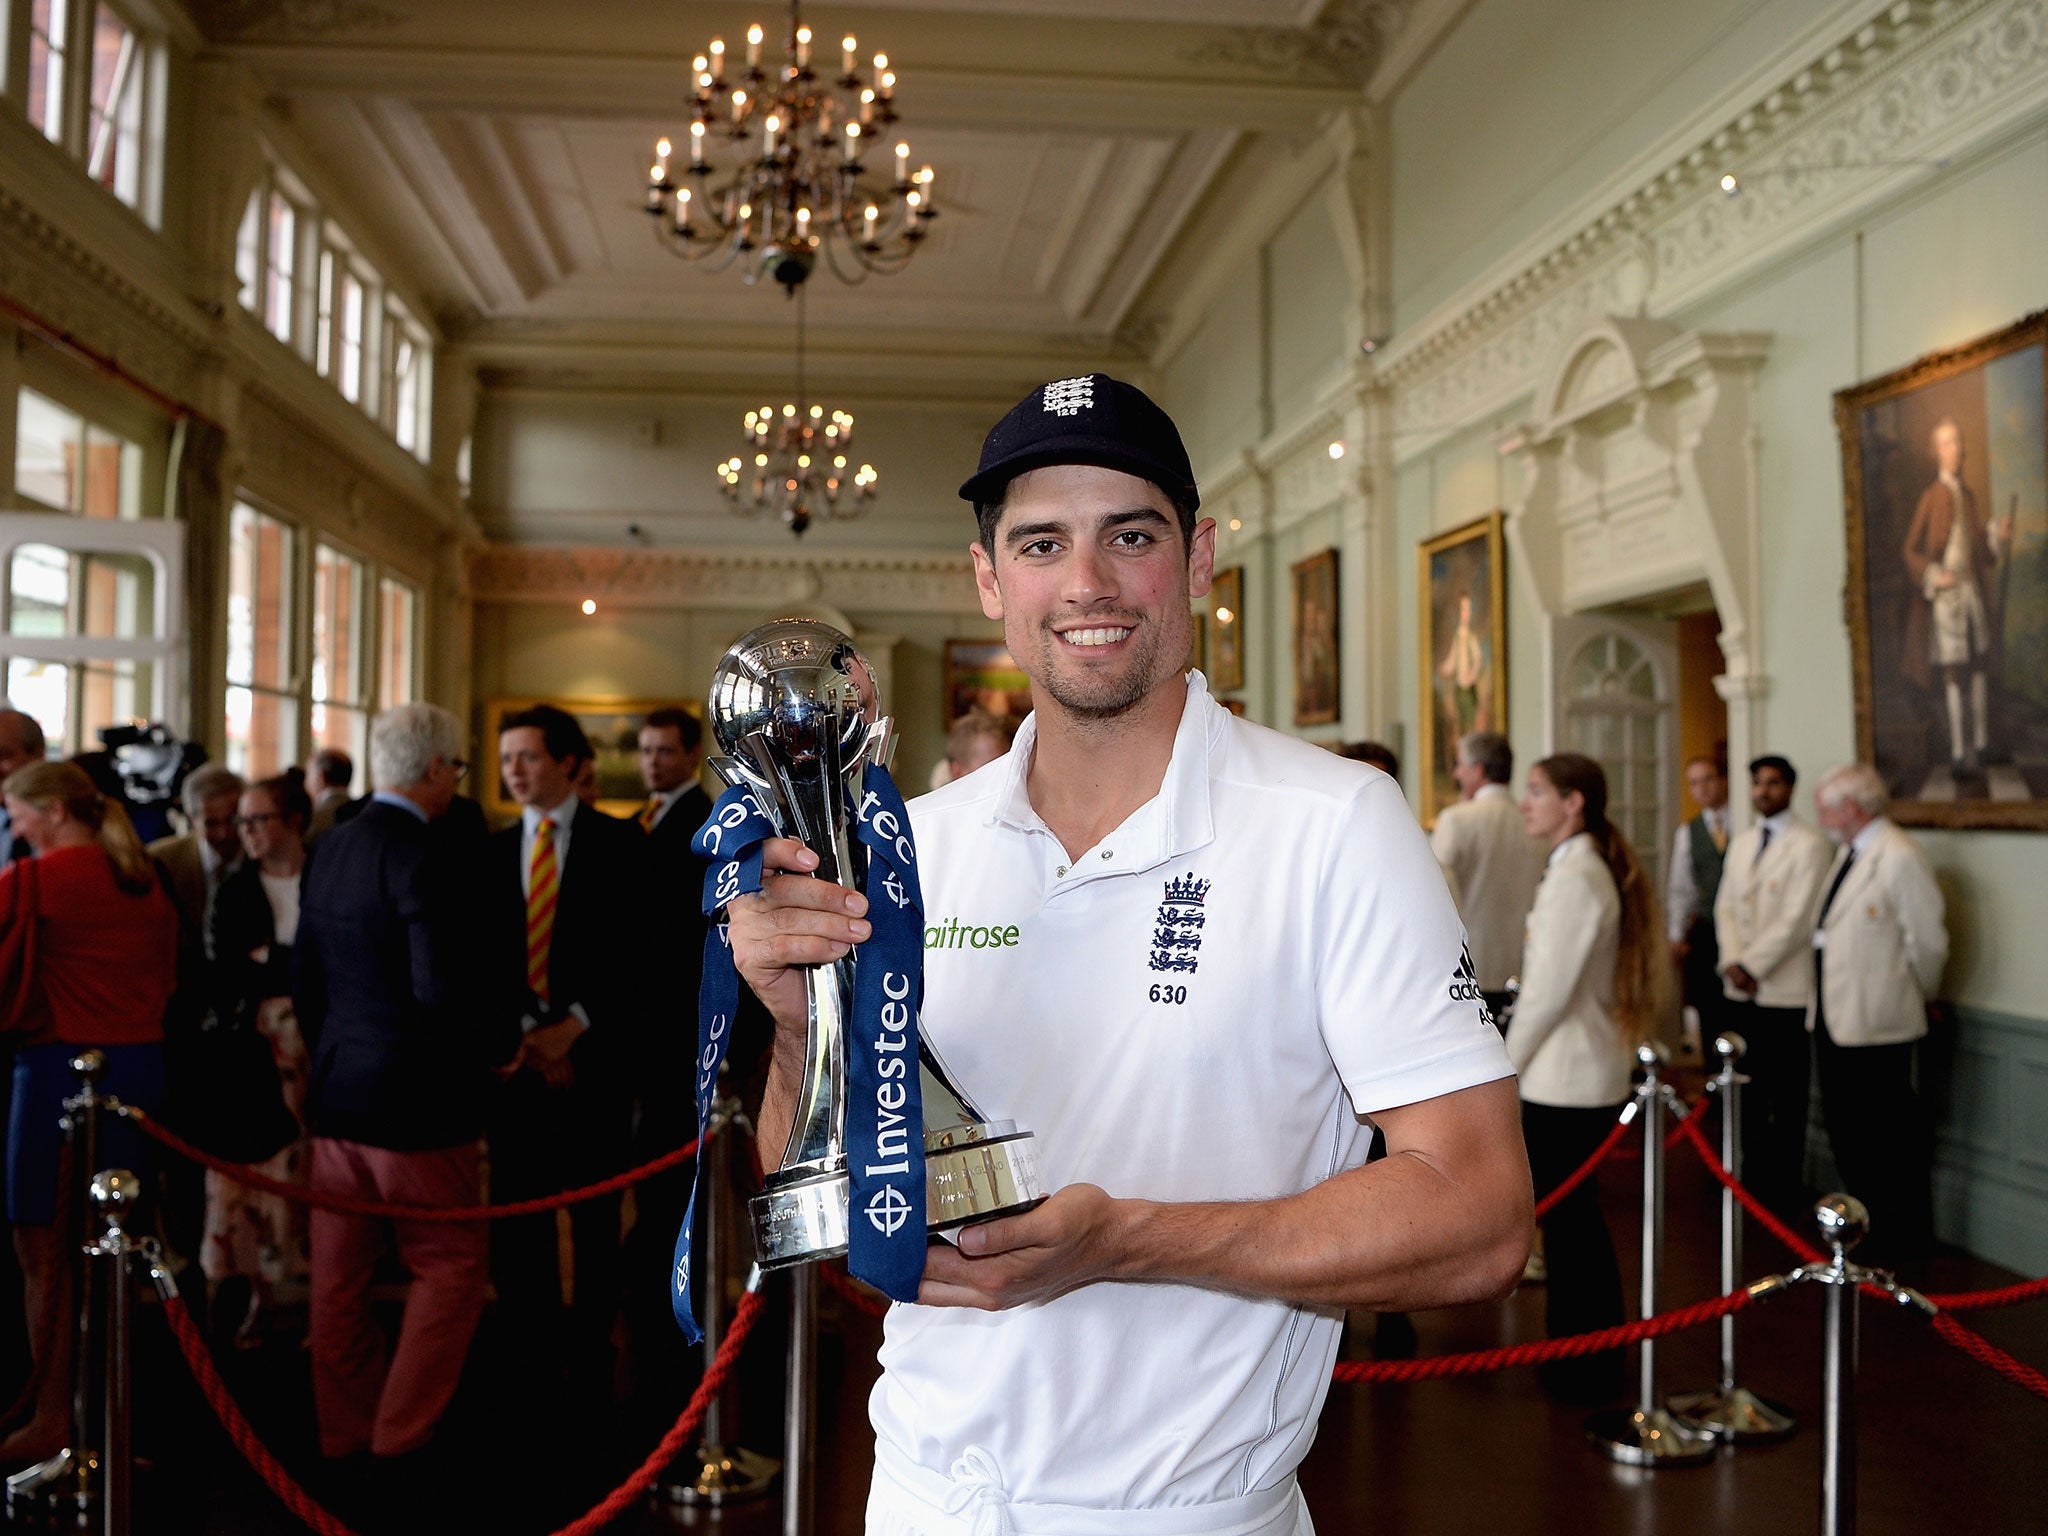 Alastair Cook shows off the trophy for beating Sri Lanka in the Test series - but wouldn't a tri-series have been better?